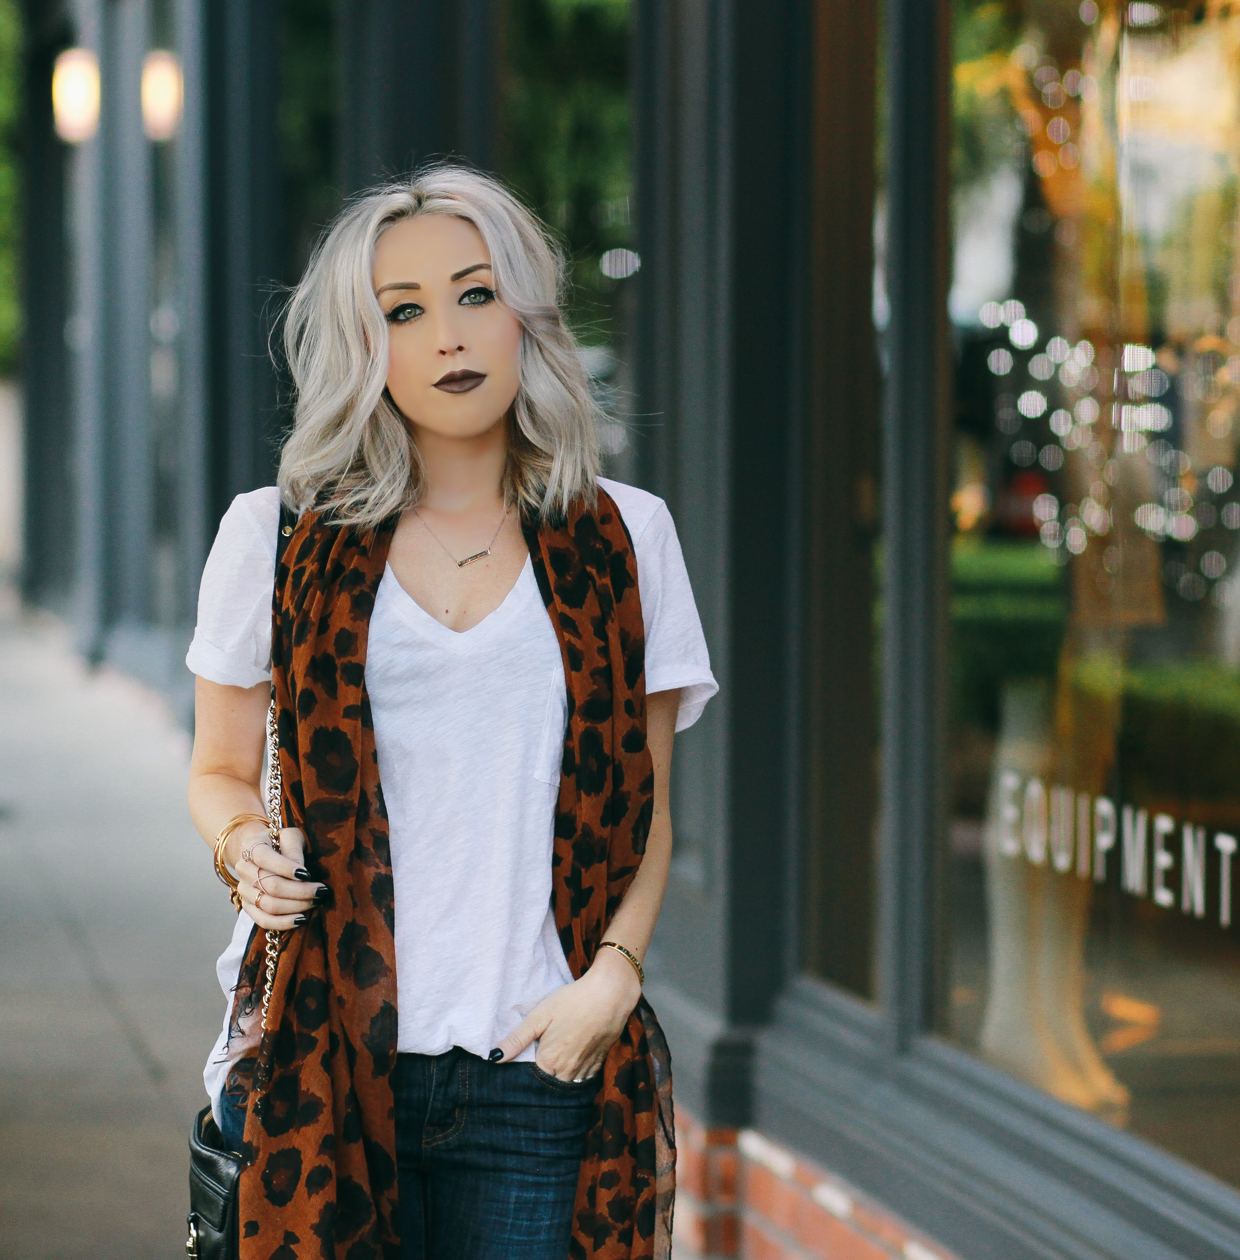 Blondie in the City | Casual Style in Leopard, Madewell White Tee, Anastasia Beverly Hills Liquid Lipstick, Short Ash Blonde Hair